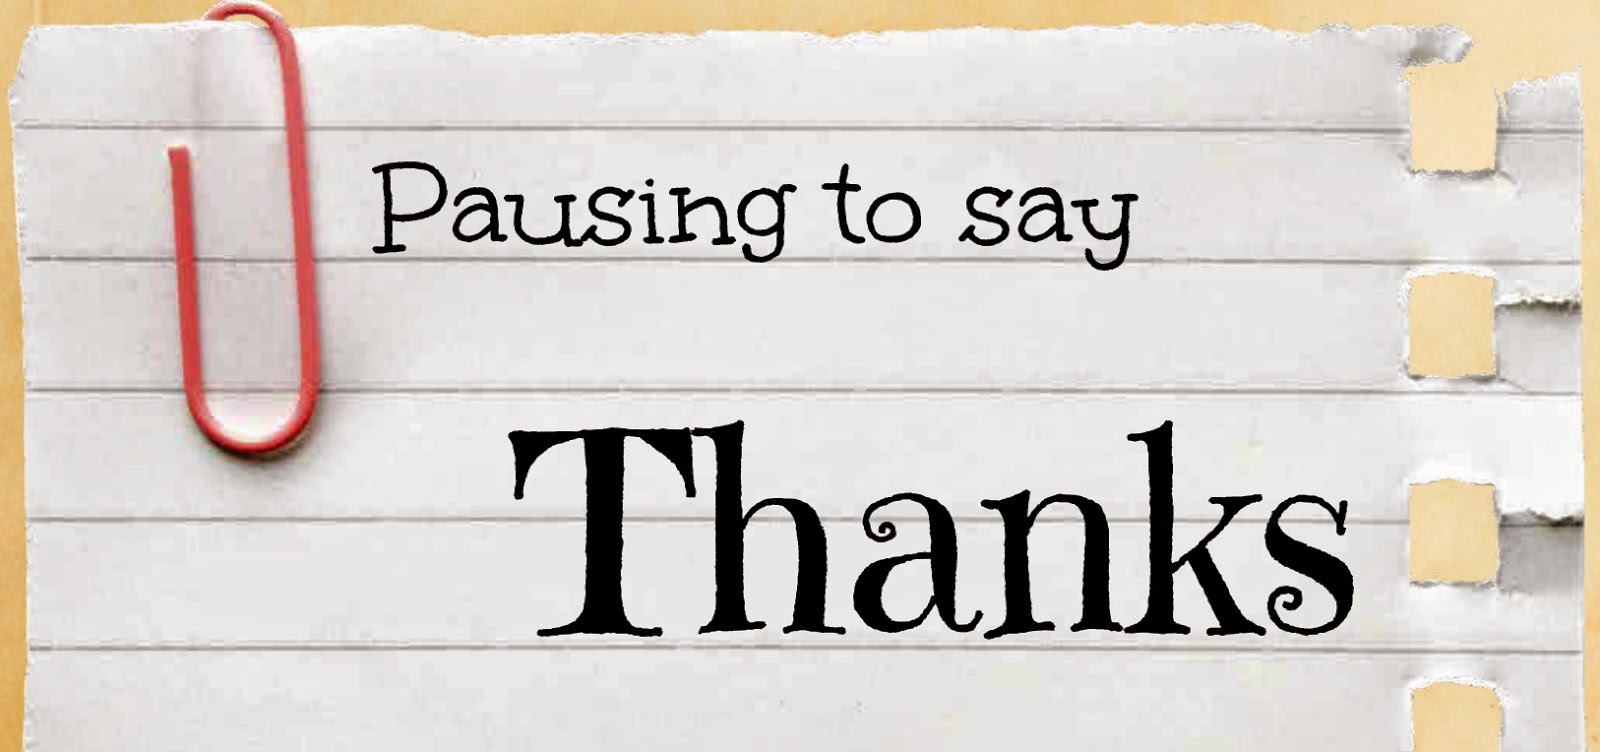 pausing to say thanks